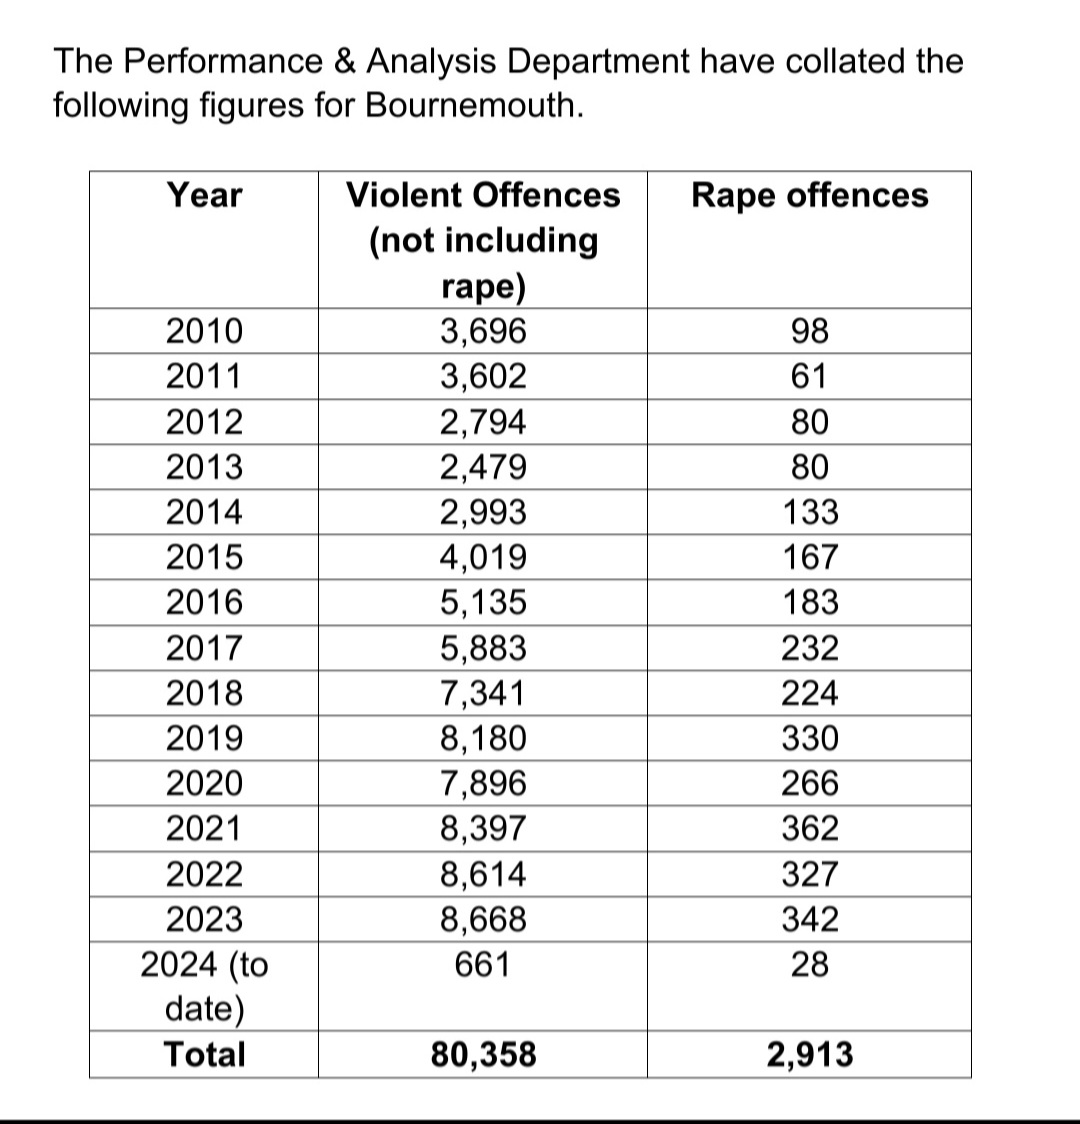 These are r*** statistics for Bournemouth obtained by a follower of mine on an FOI.

Since they started accepting asylum seekers there has been a 3X to 4X increase in assaults. 

Some of it maybe women more confident to report attacks, but not for all.